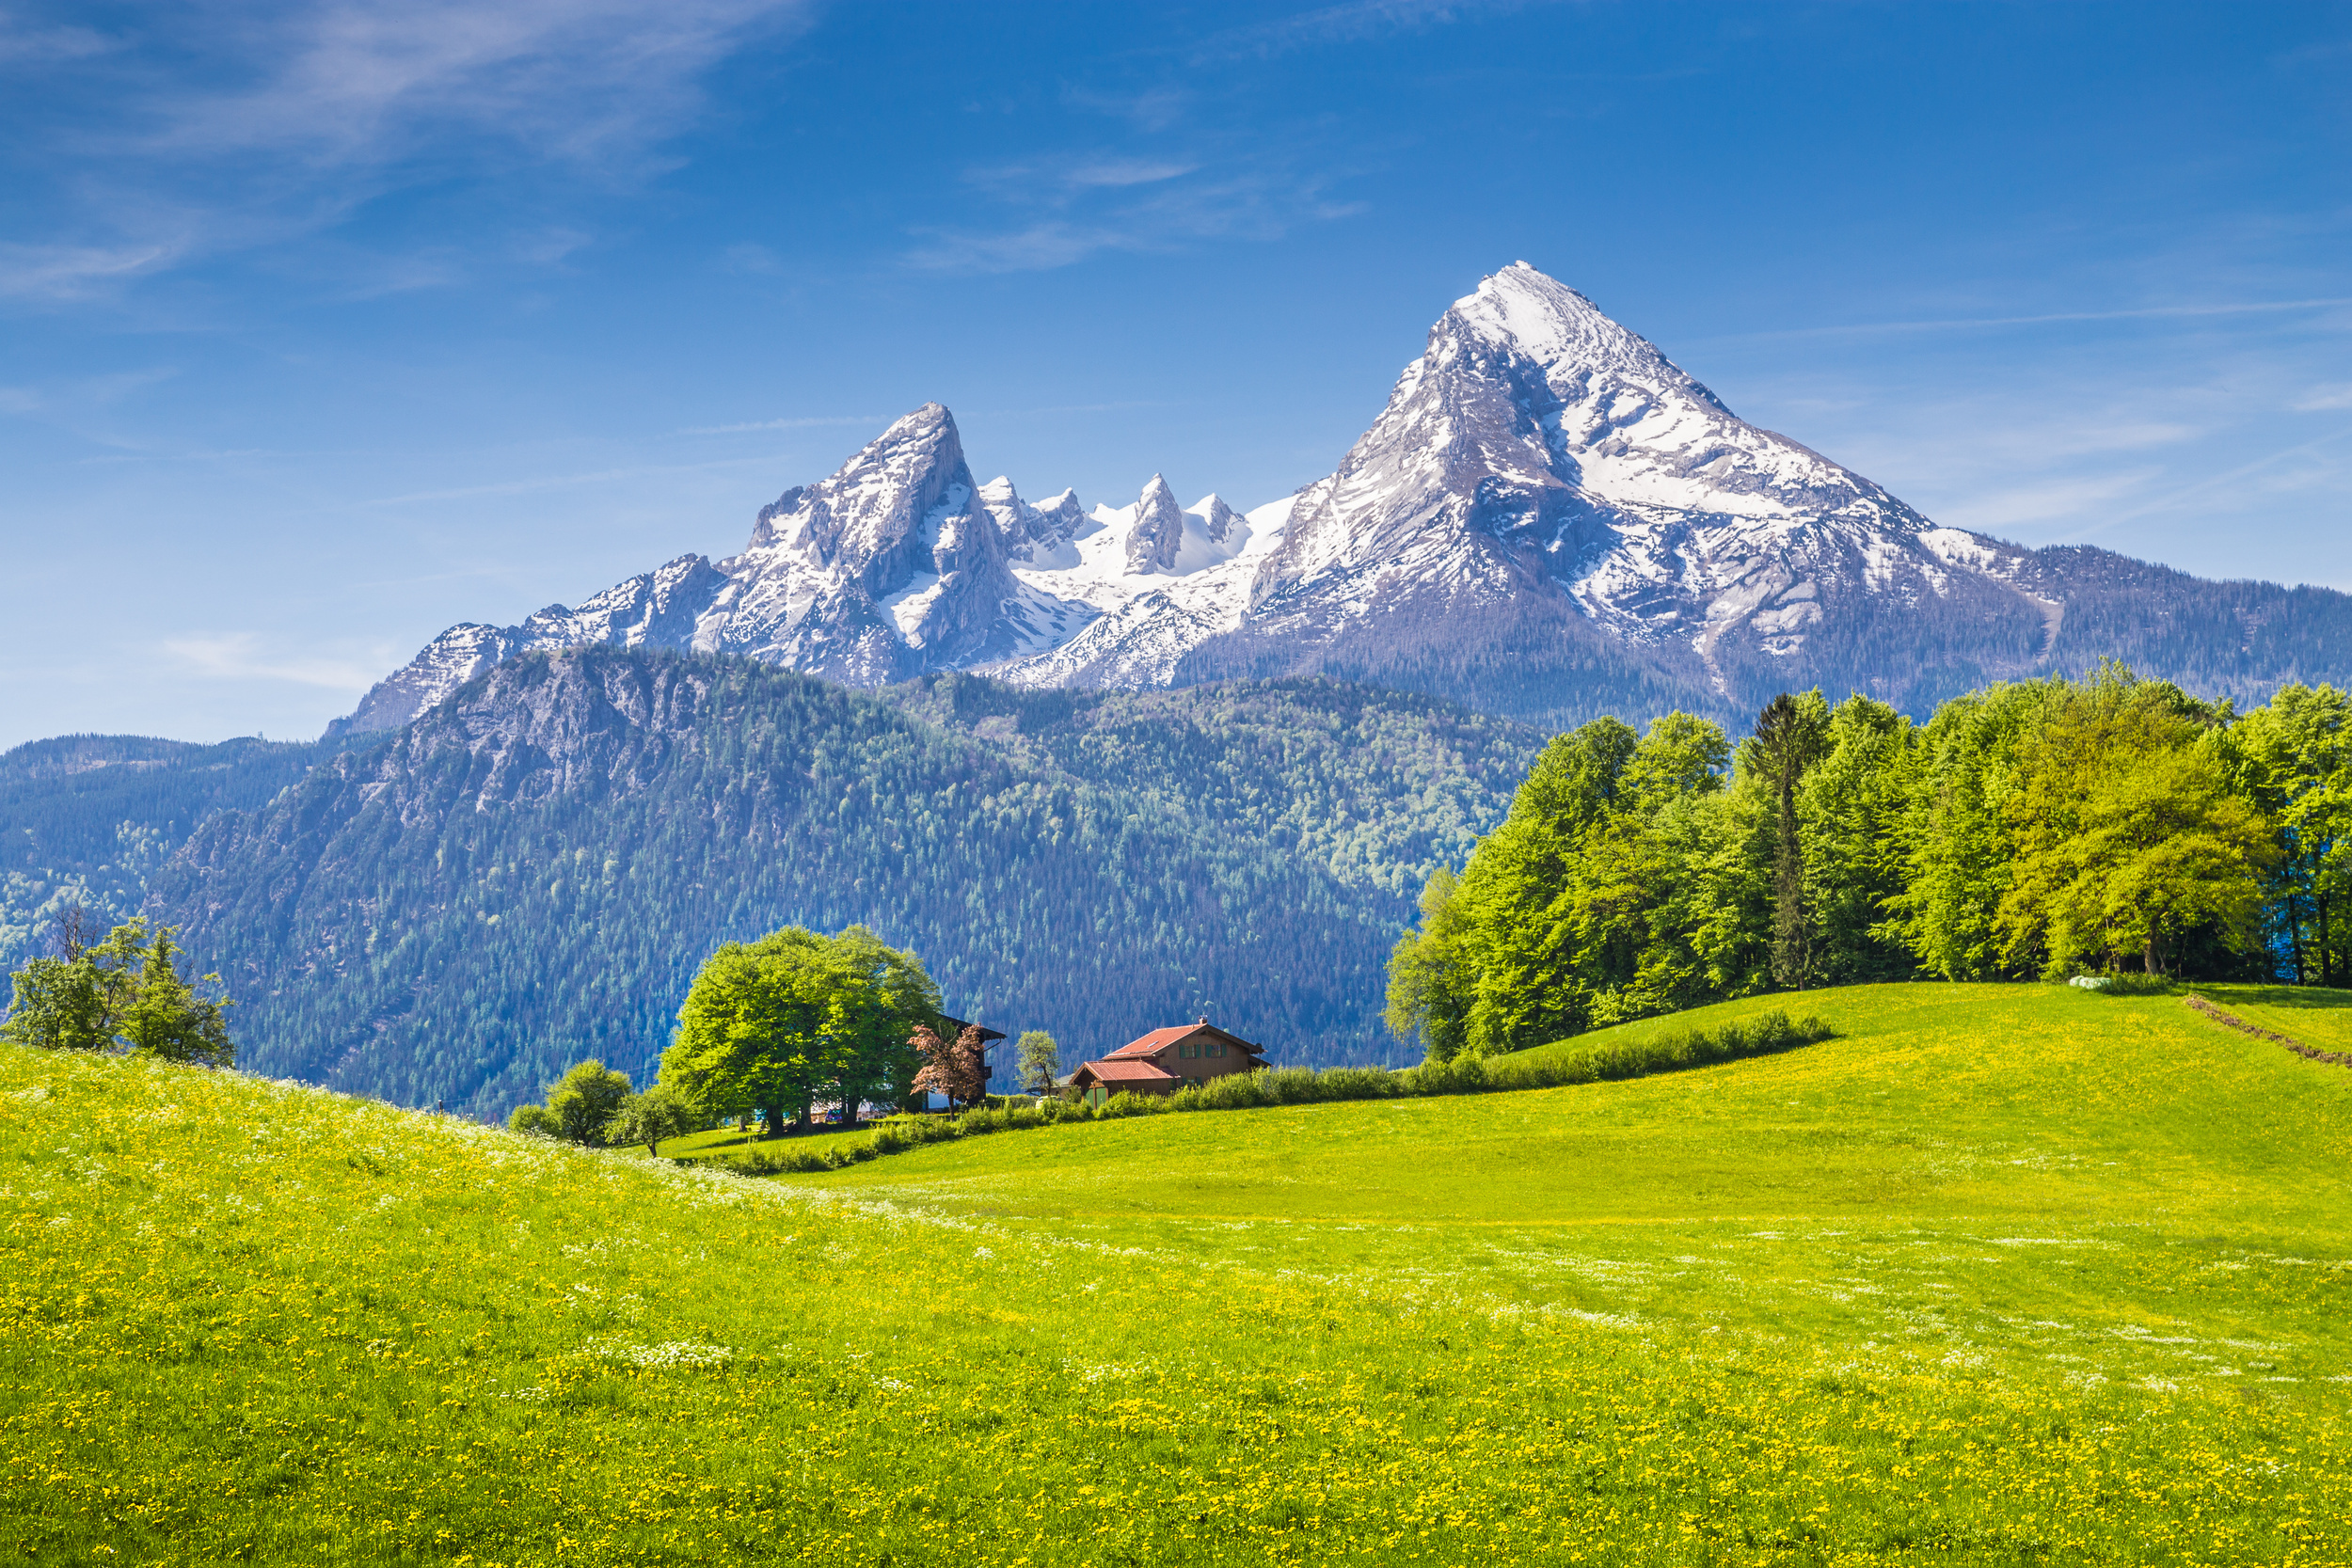 <p>The Bavarian Alps are unlike any other part of Germany and make a great day trip from Munich. You can take a gondola up Germany’s highest point, the Zugspitze, hike or ski the trails, or just enjoy lake views. Bonus — don’t forget to visit the Neuschwanstein Castle on the way back to the city. </p><p>You may also like: <a href='https://www.yardbarker.com/lifestyle/articles/our_20_favorite_brands_of_chocolate_021224/s1__25606490'>Our 20 favorite brands of chocolate</a></p>